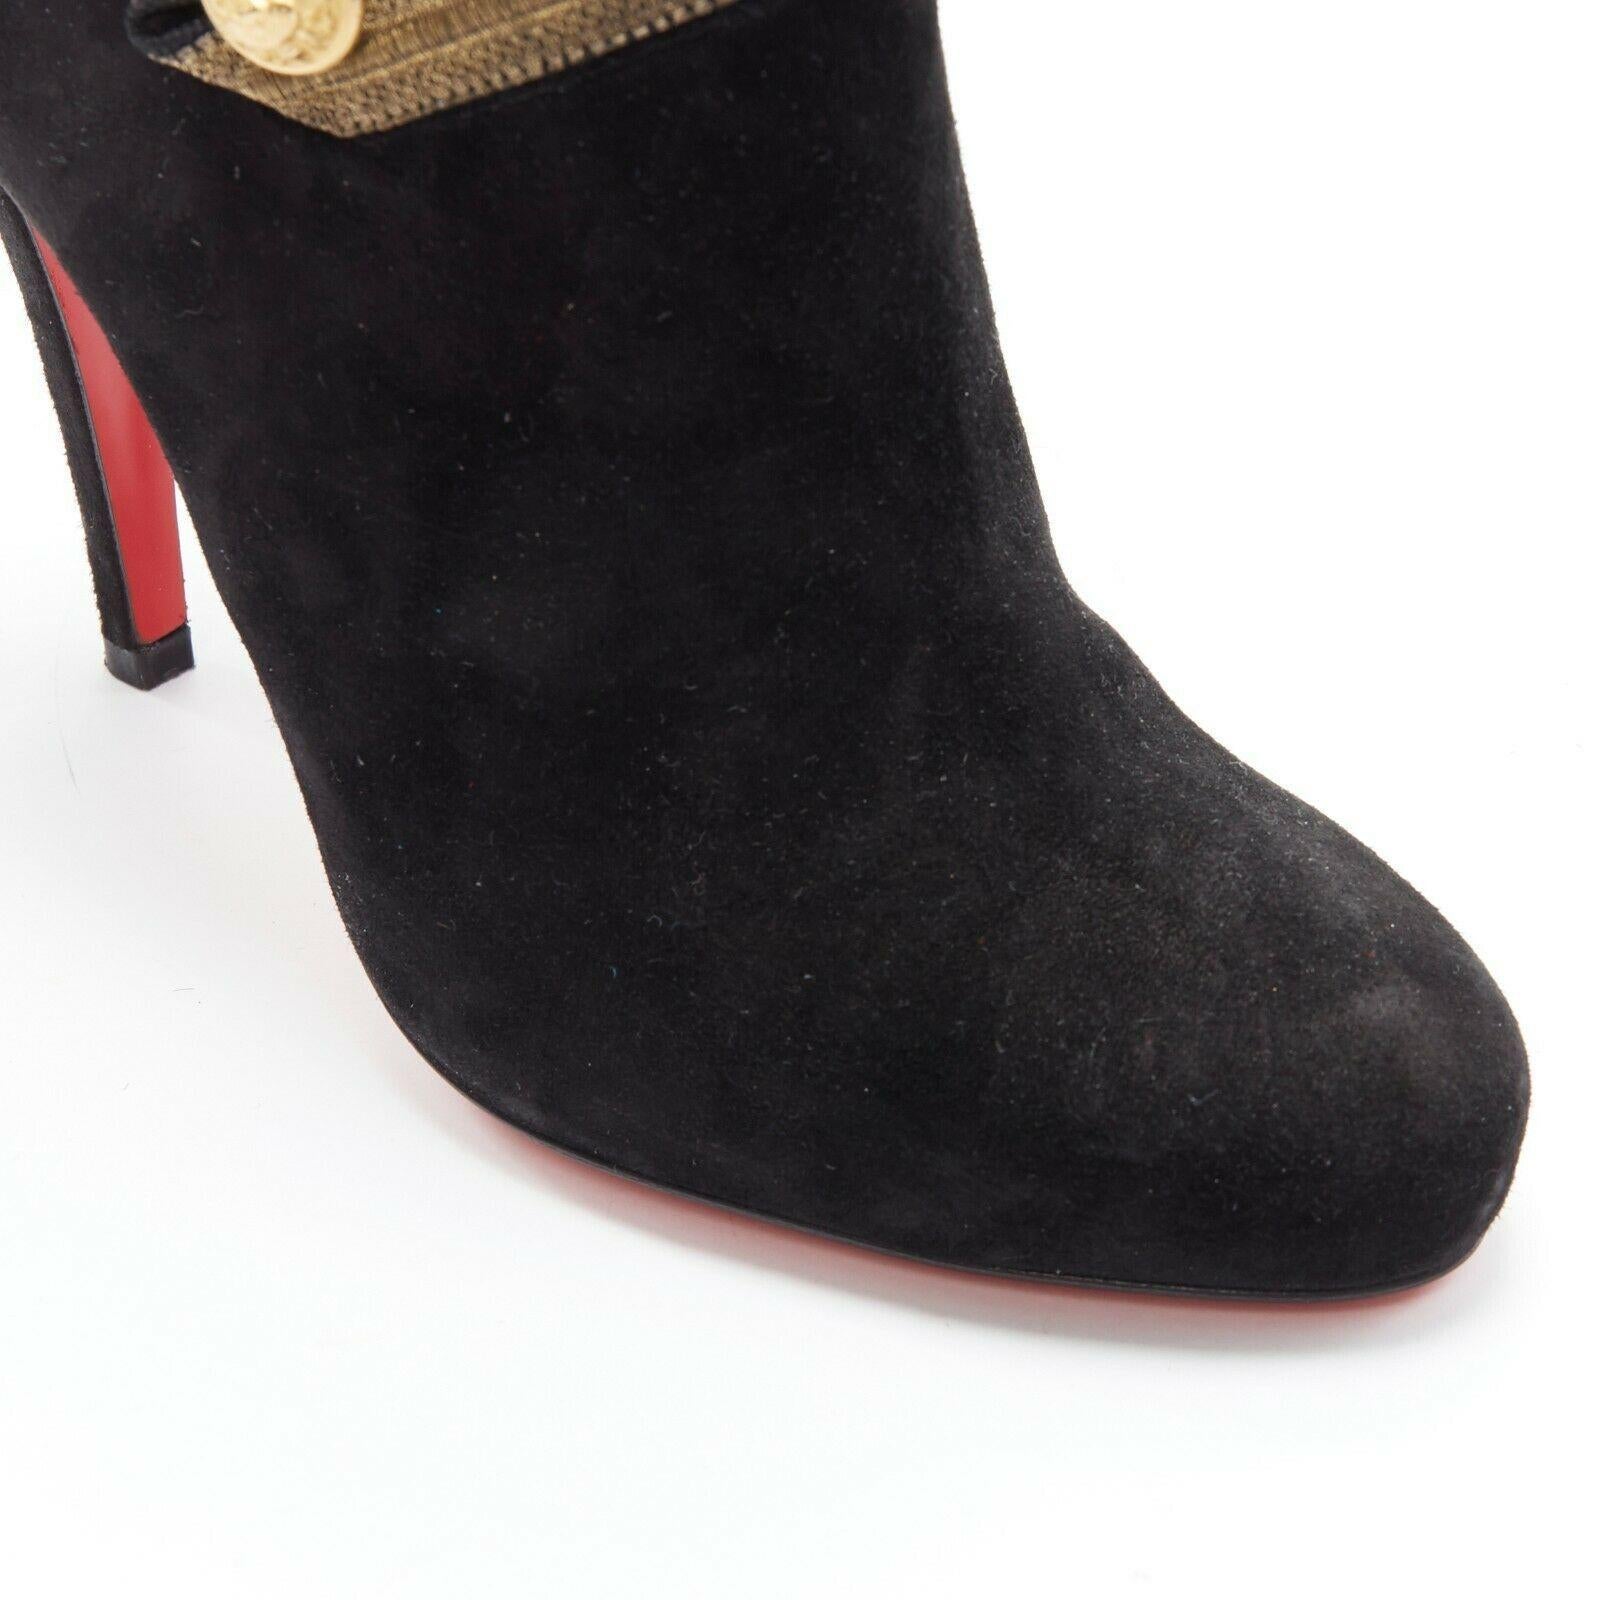 new CHRISTIAN LOUBOUTIN Marychal 100 black suede gold military trim bootie EU38 3